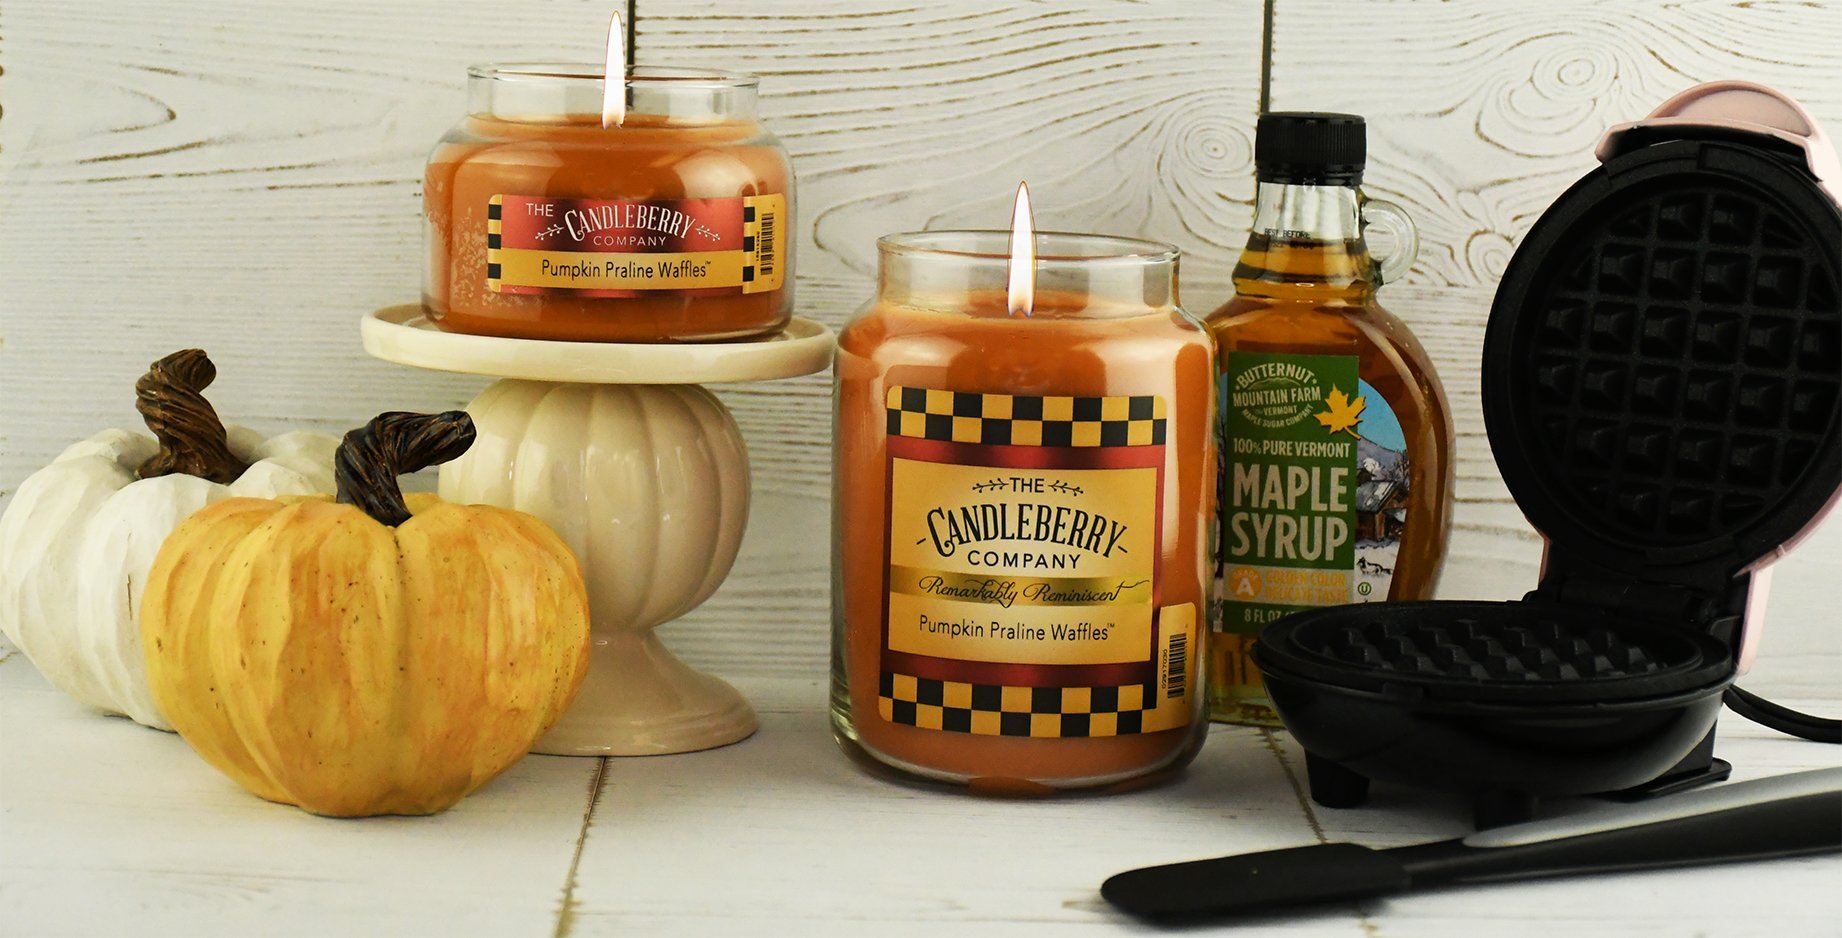 Pumpkin Praline Waffles™, 10 oz. Jar, Scented Candle 10 oz. Small Jar Candle The Candleberry Candle Company 